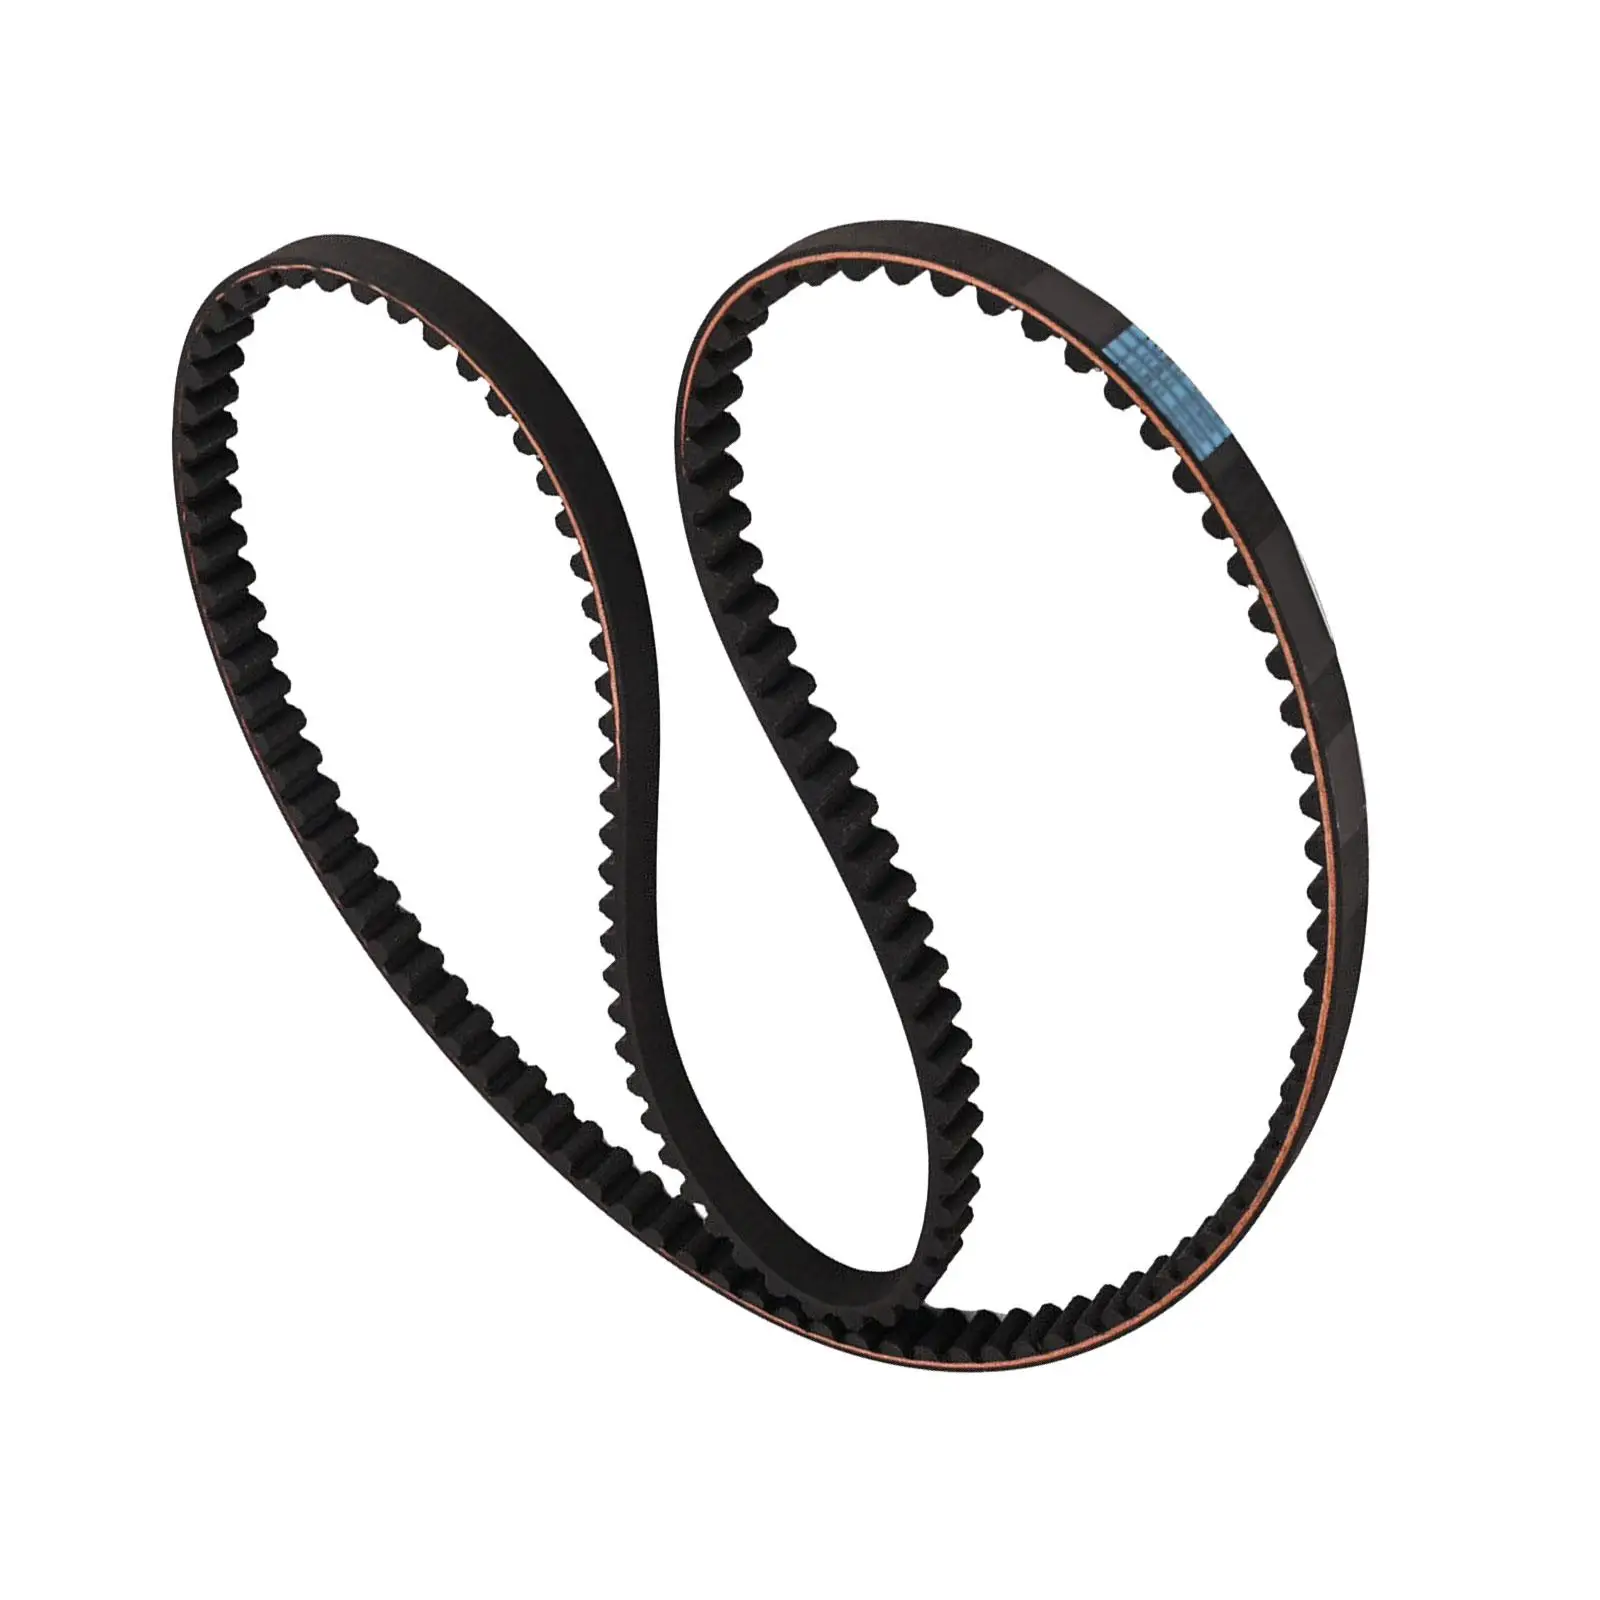 

Rear Drive Belt Durable Motorcycle Replacement Parts for Buell Blast Good Performance Wear Resistance Motorbike Accessories